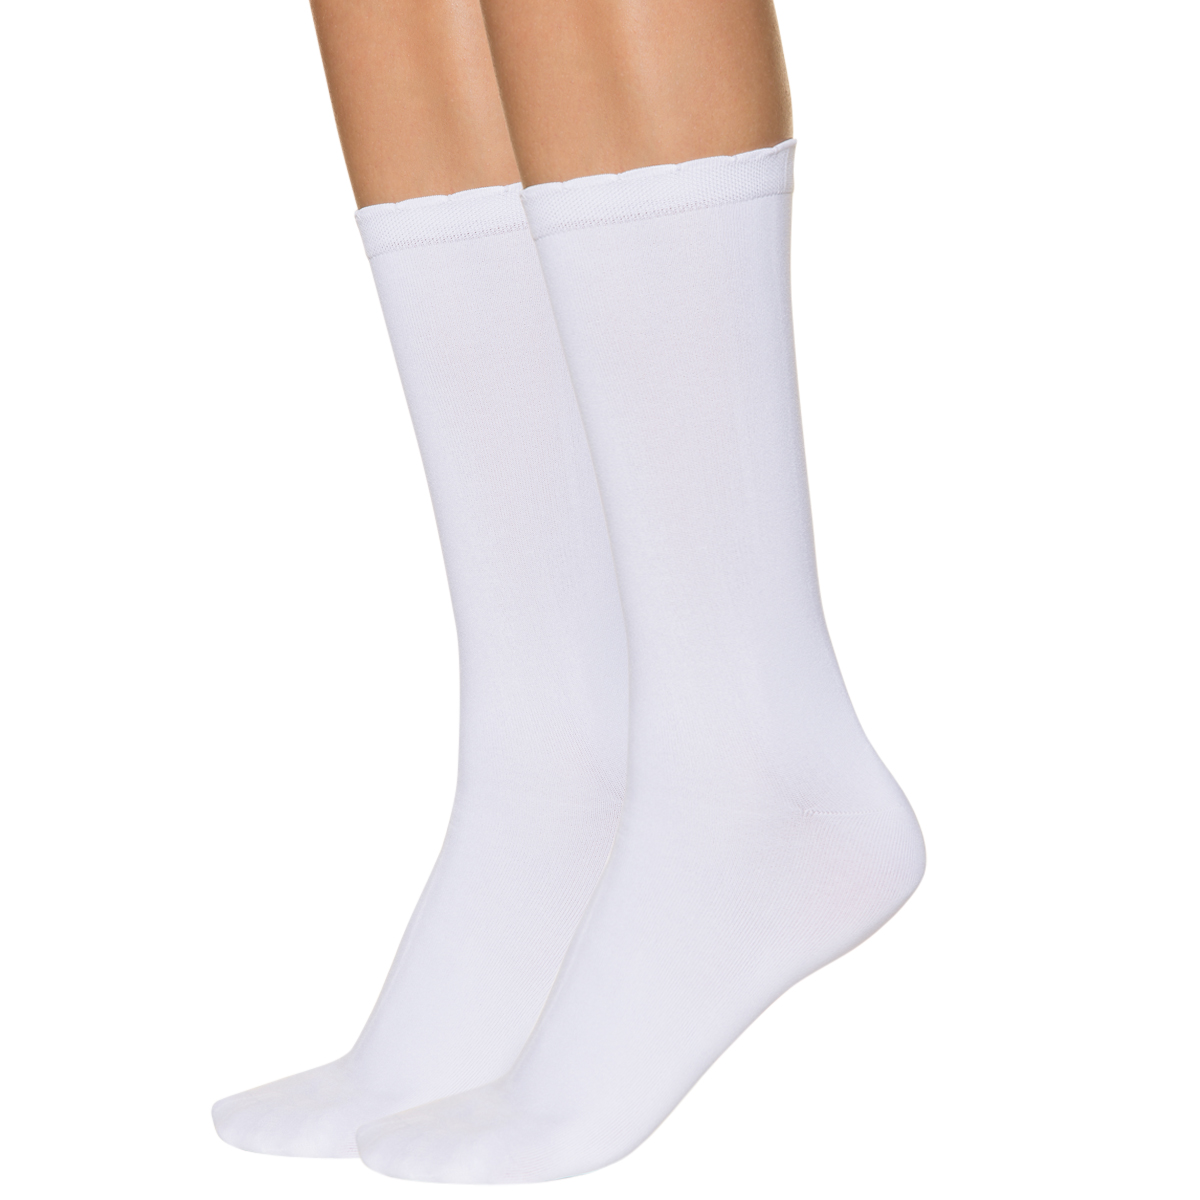 CHAUSSETTES FEMME OPAQUES BLANCHE TU 203290 : Boumba